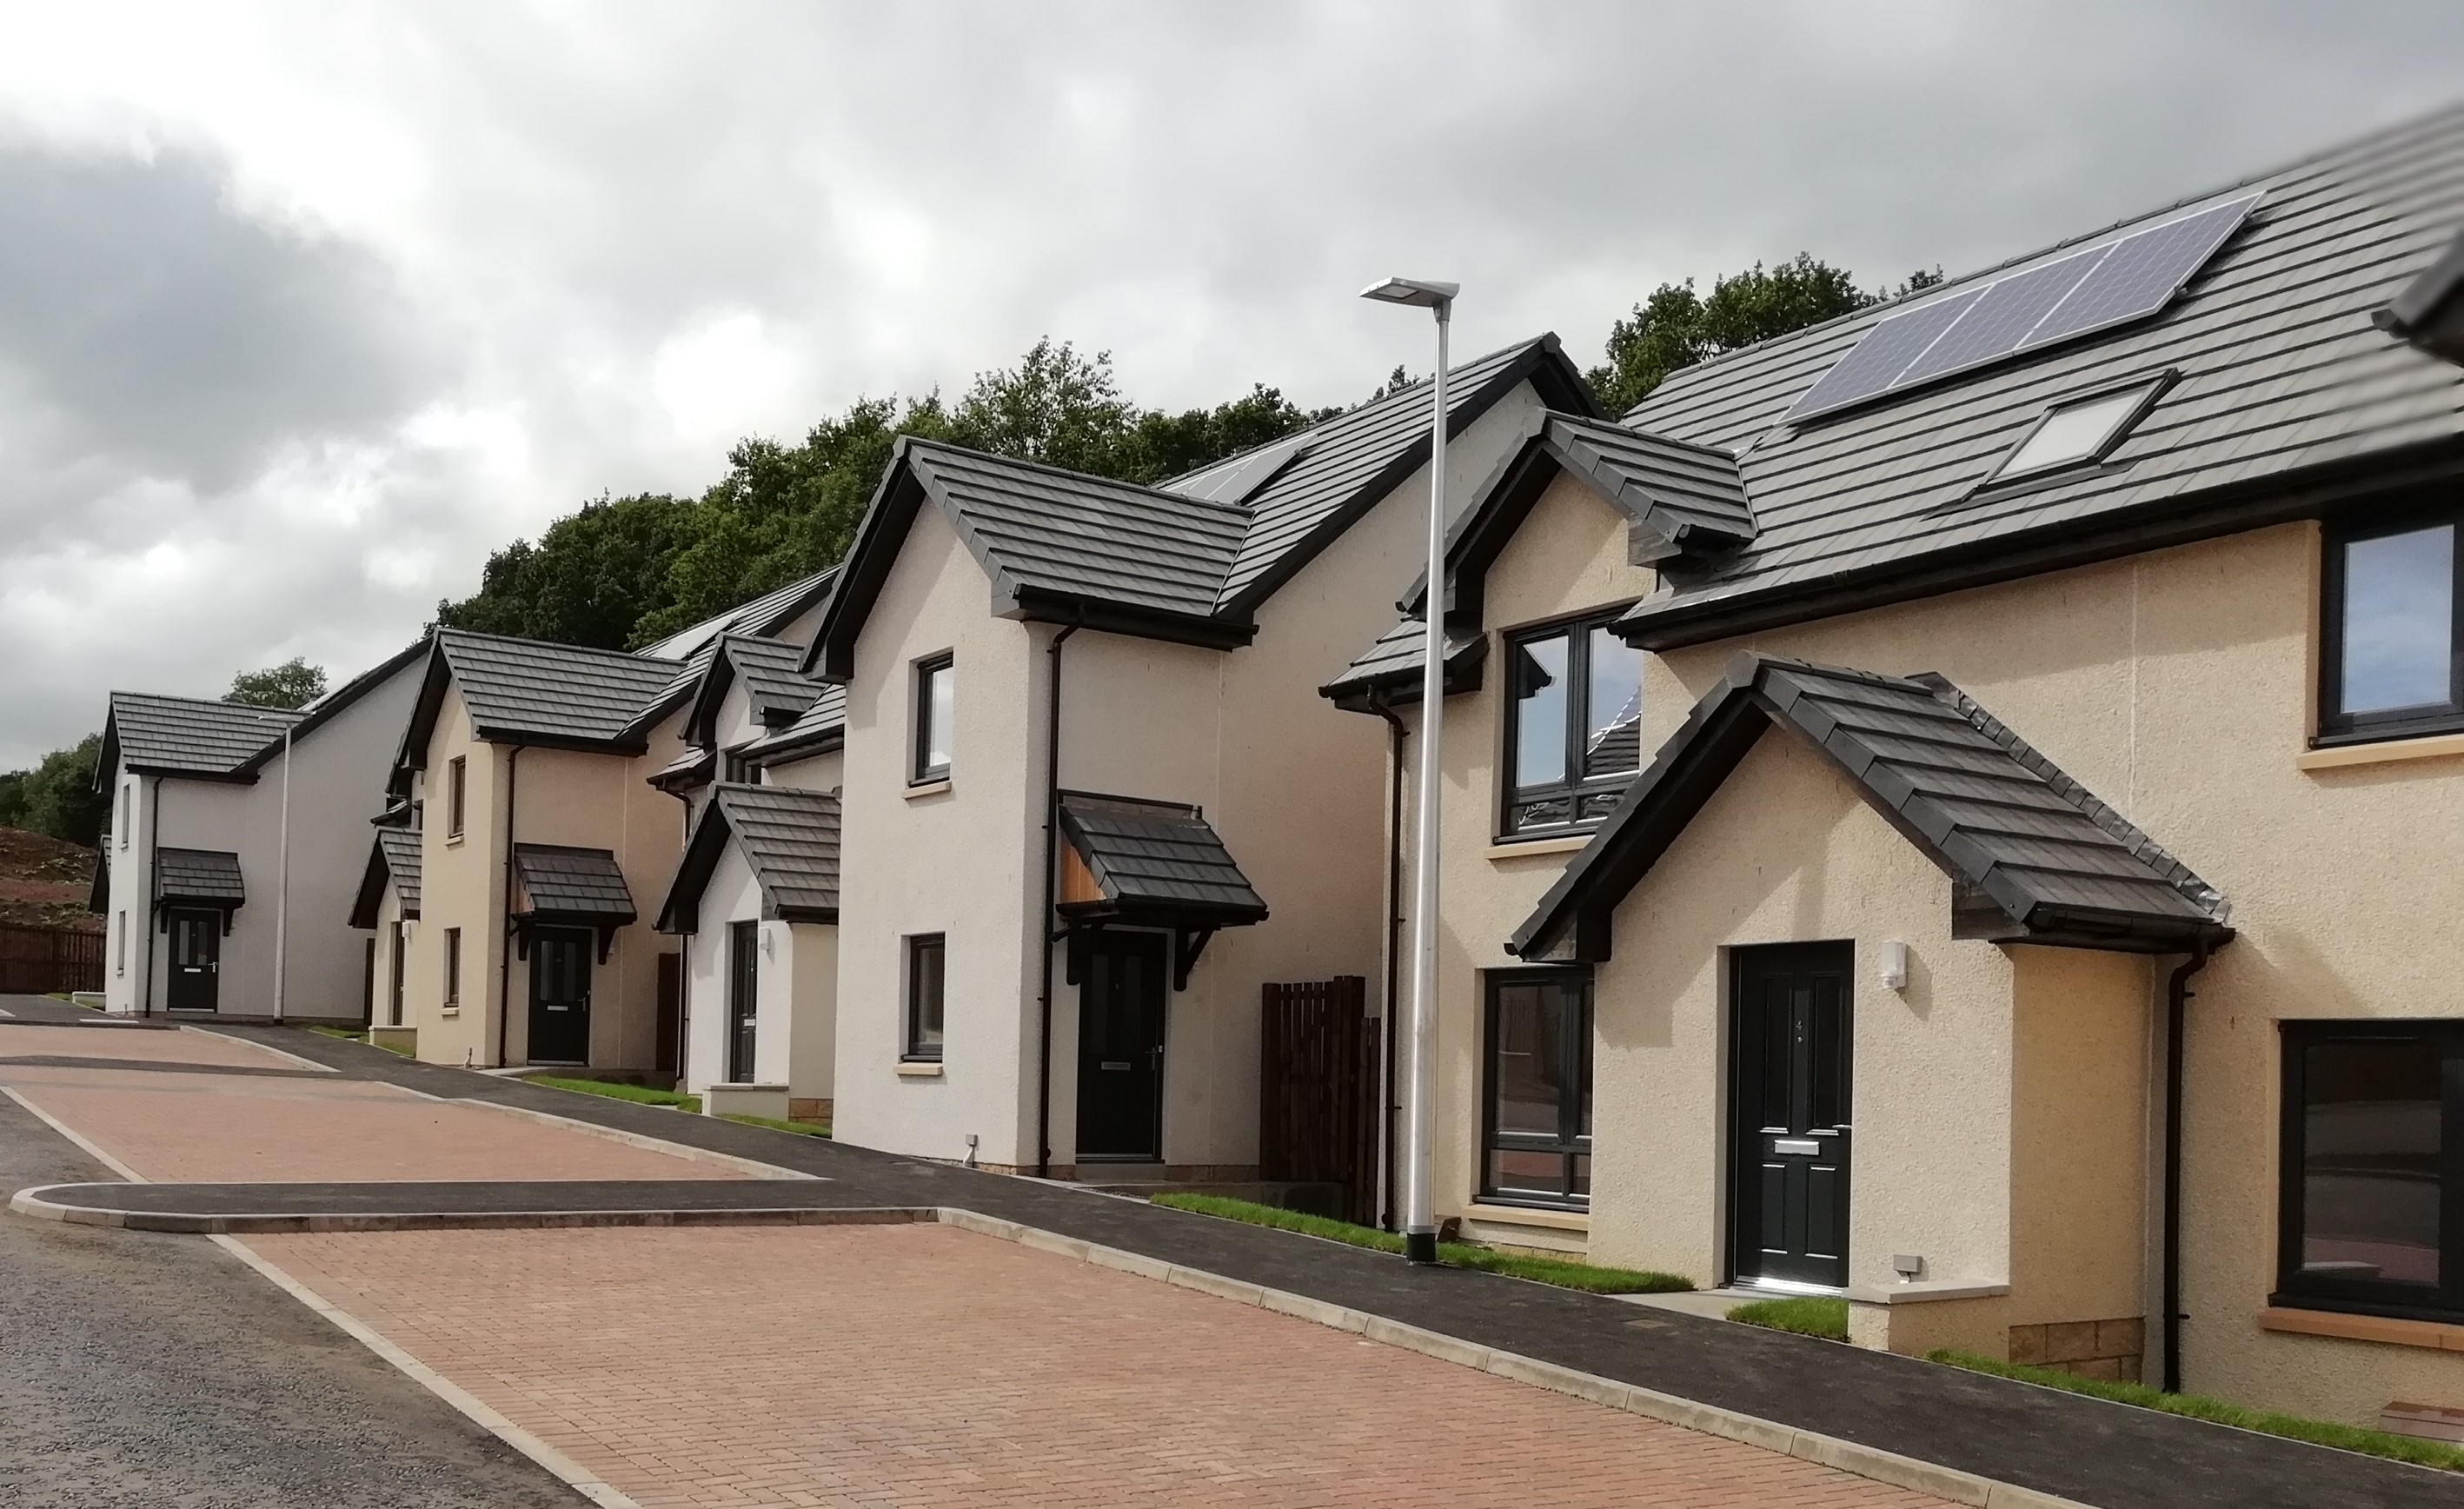 Planning approval for affordable Borders homes